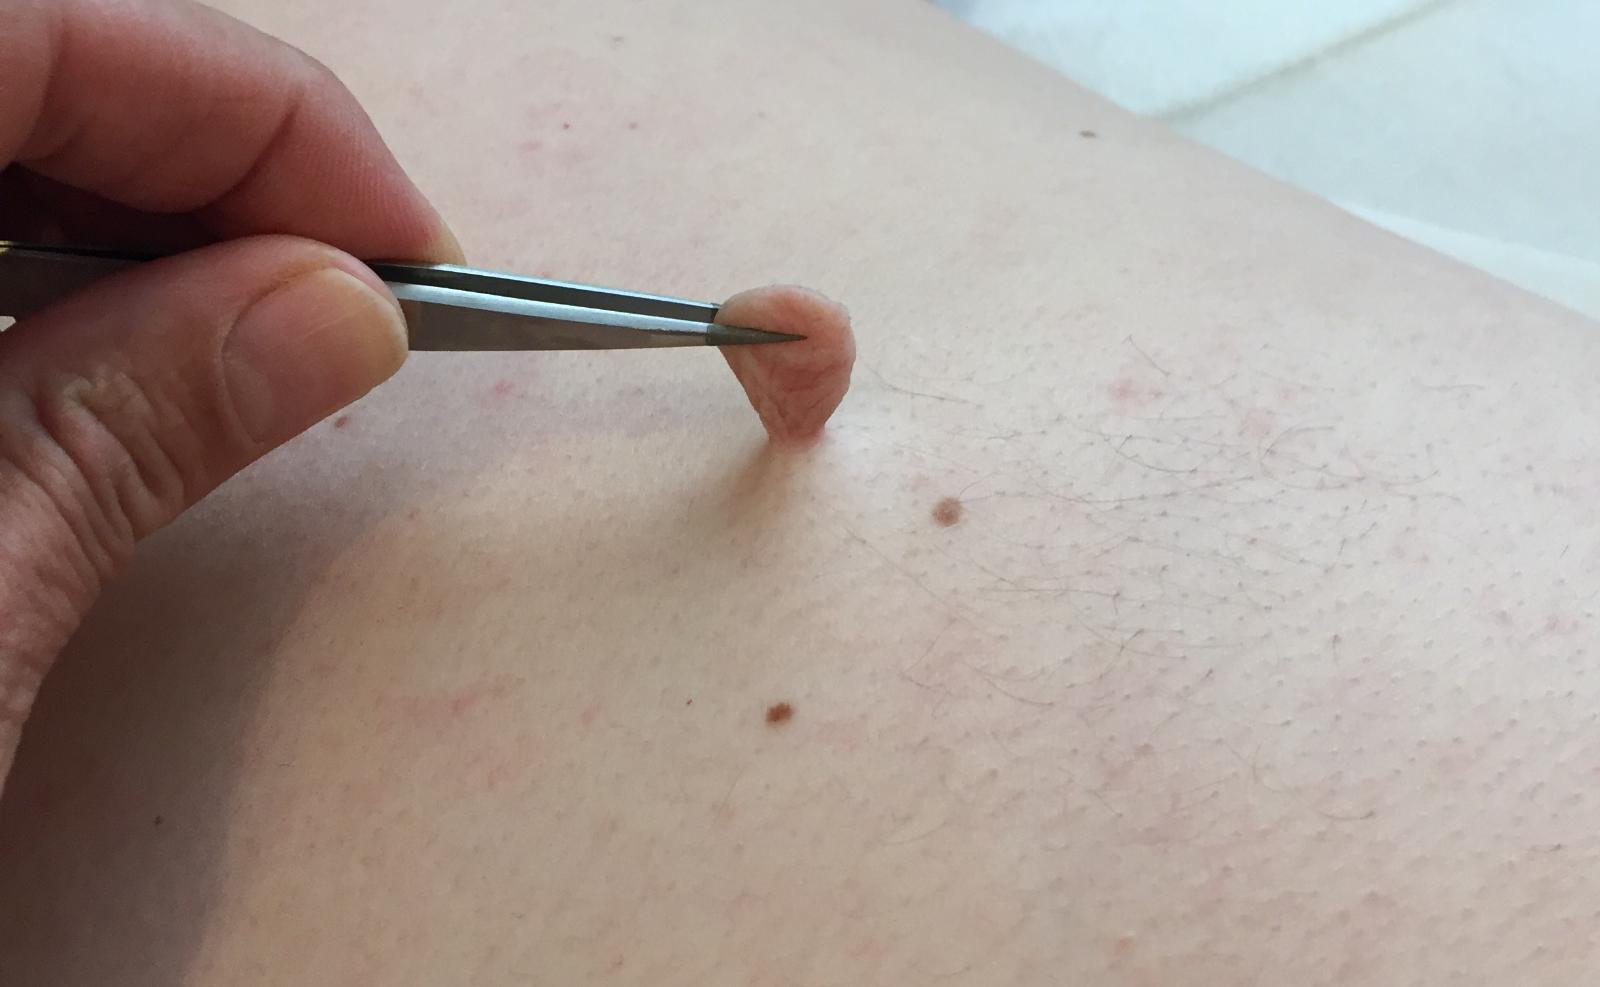 Skin Tags and Sebaceous Cyst Removal